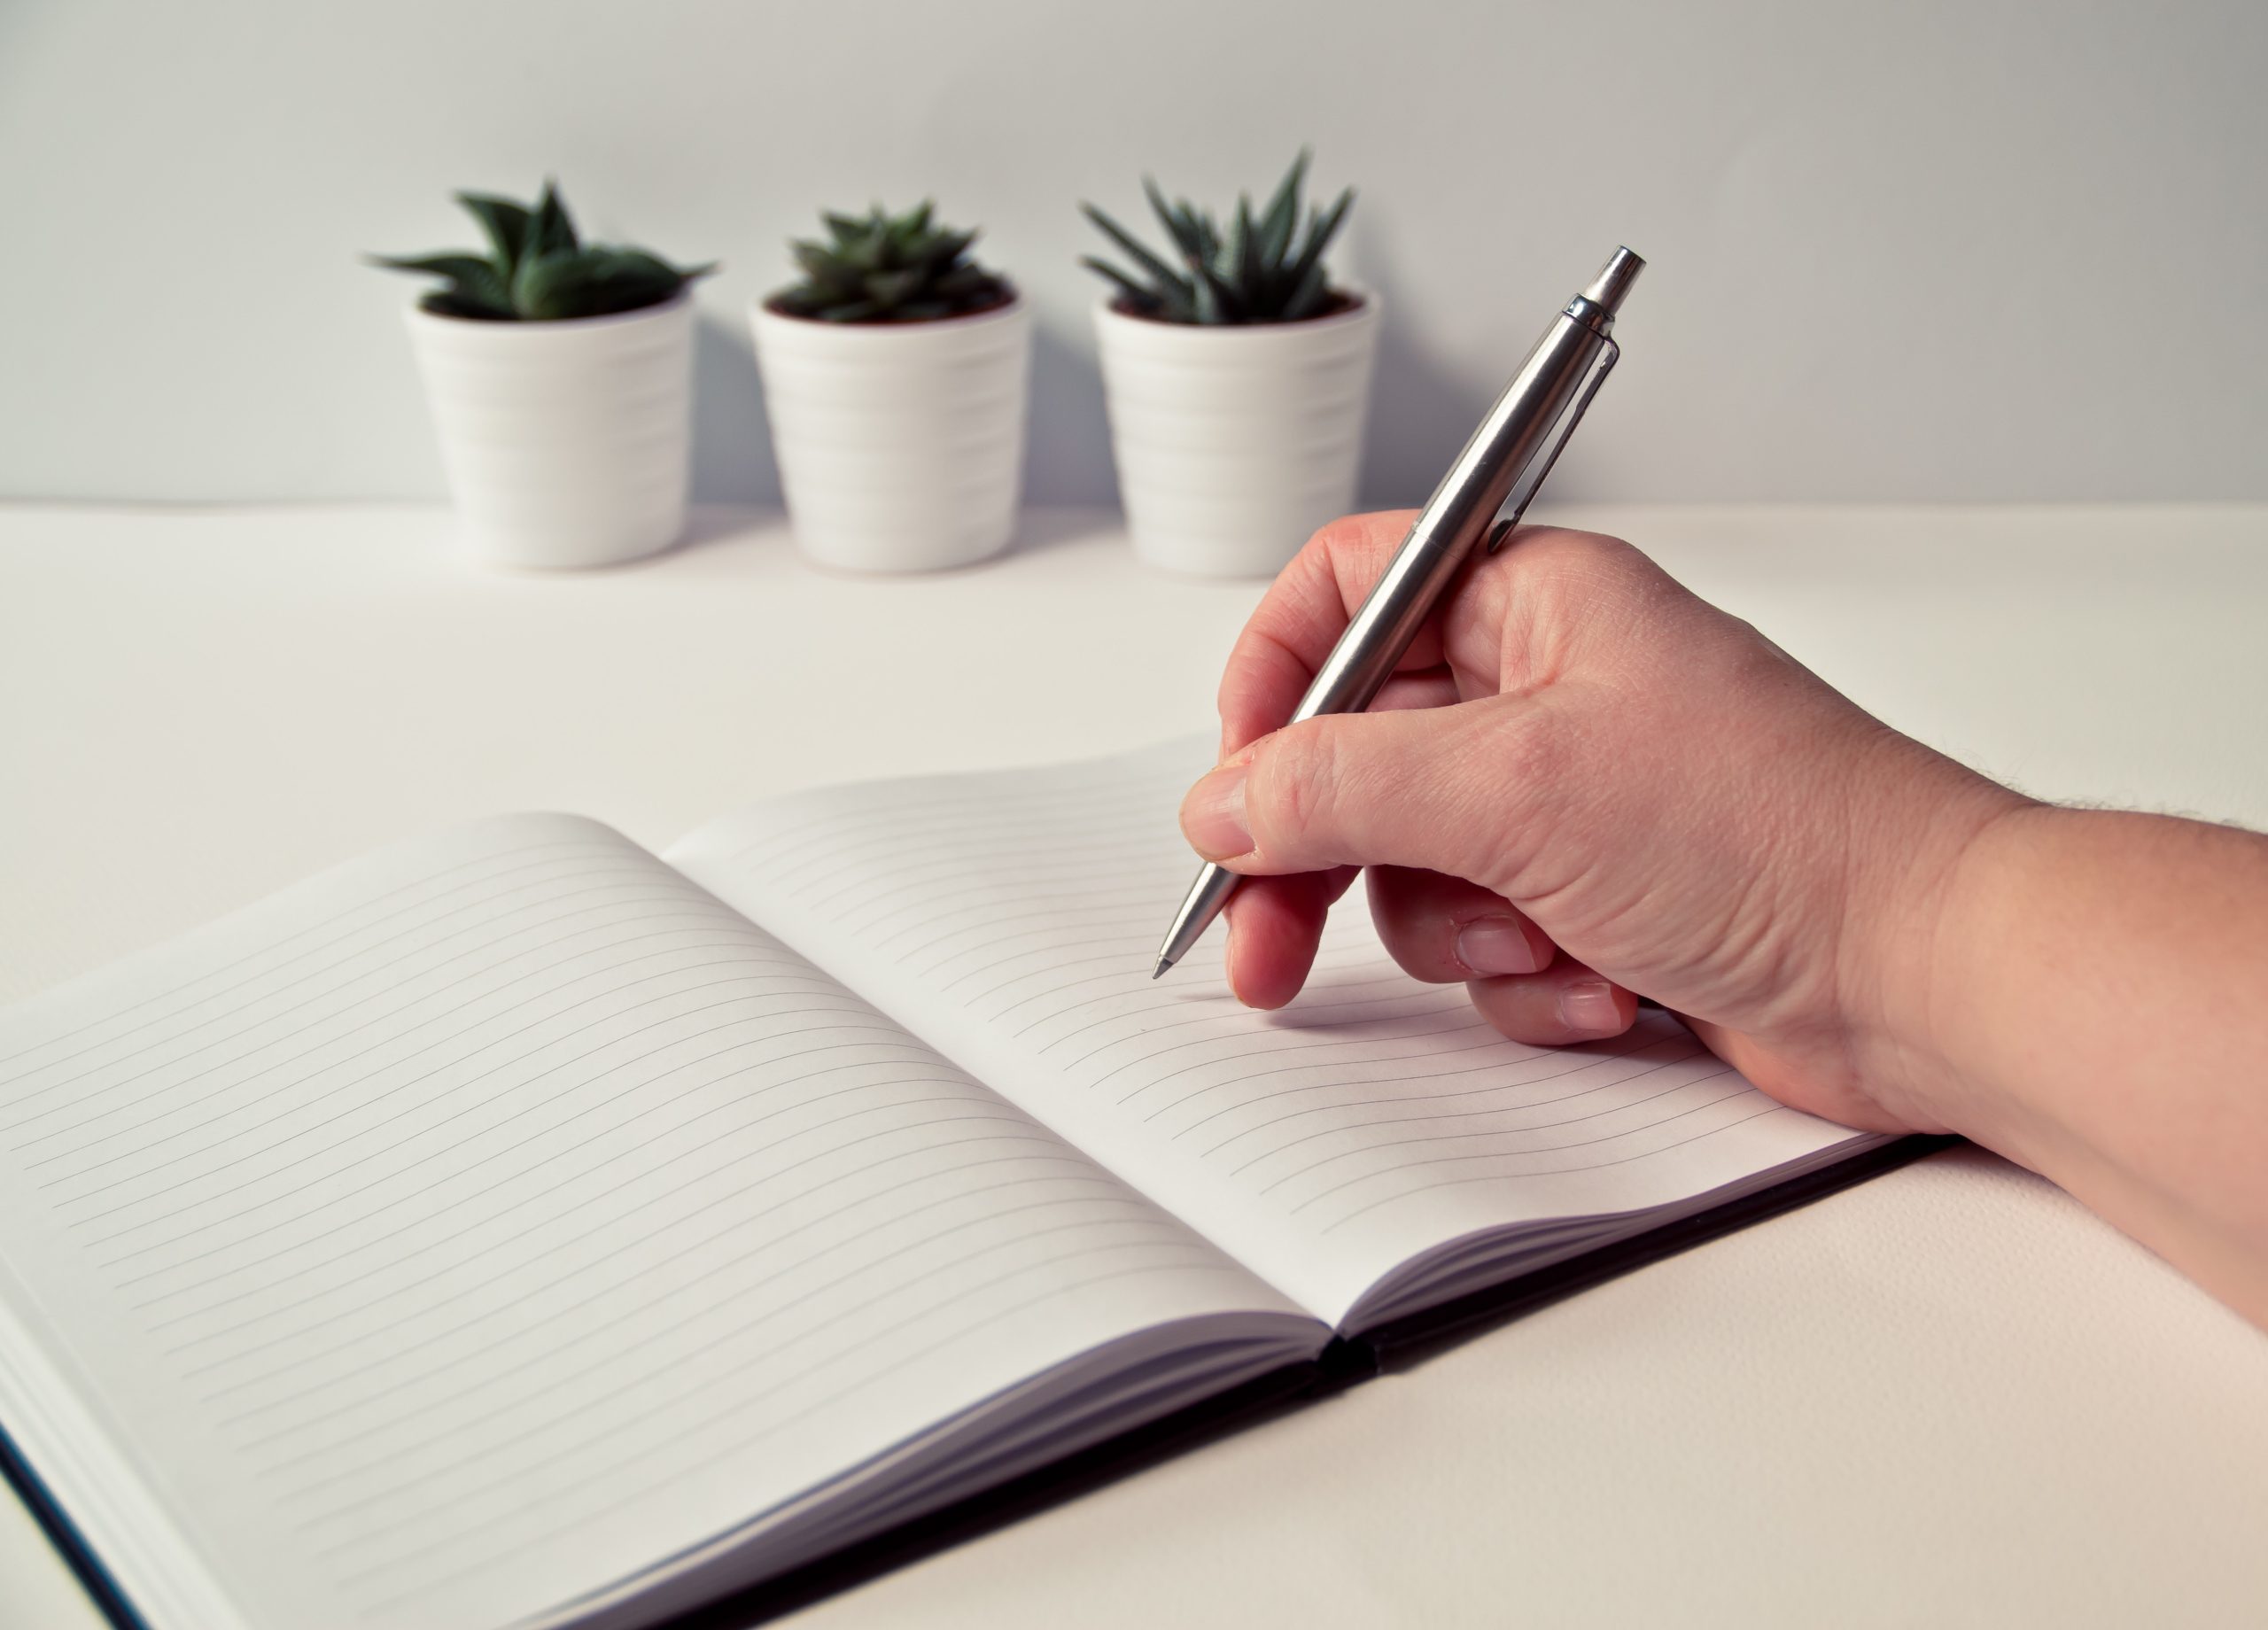 hand holding a pen above a blank notebook on a white table. Three succulents are in the background.